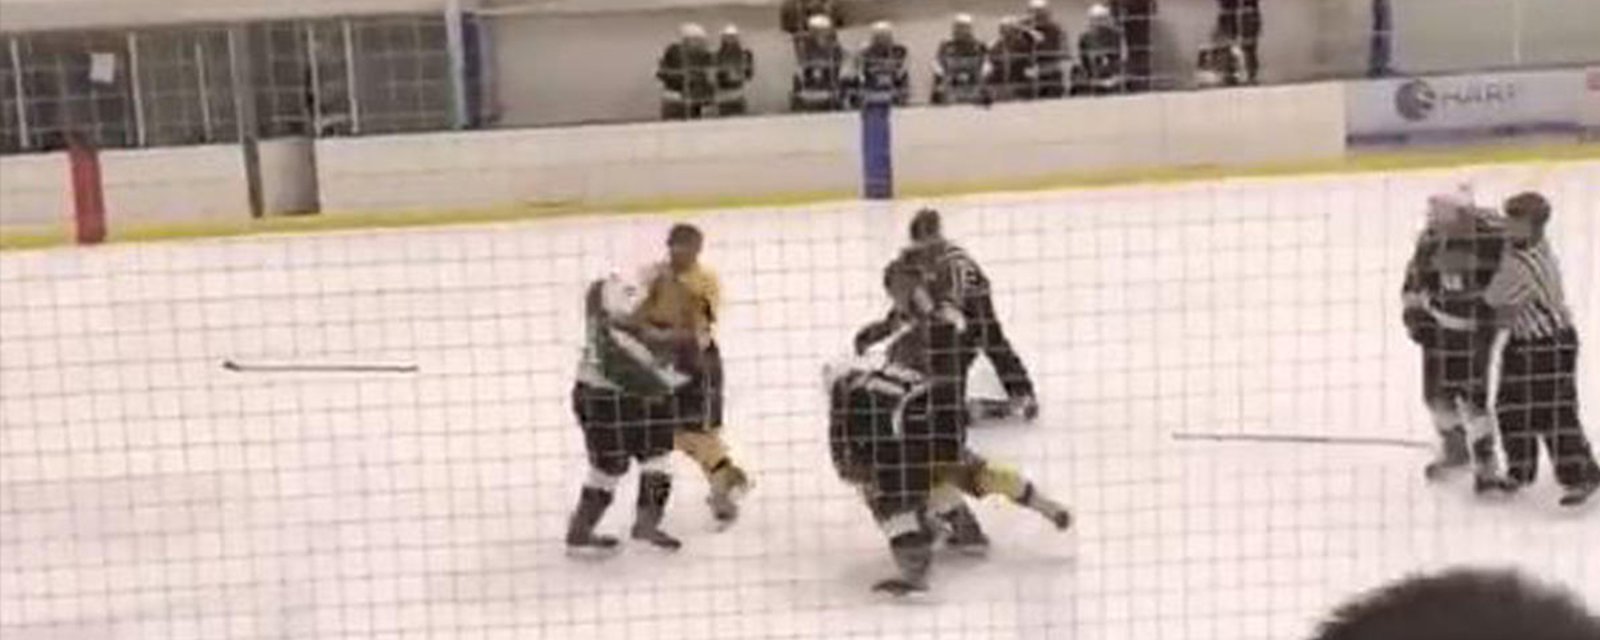 Six teenagers charged in brutal on-ice brawl